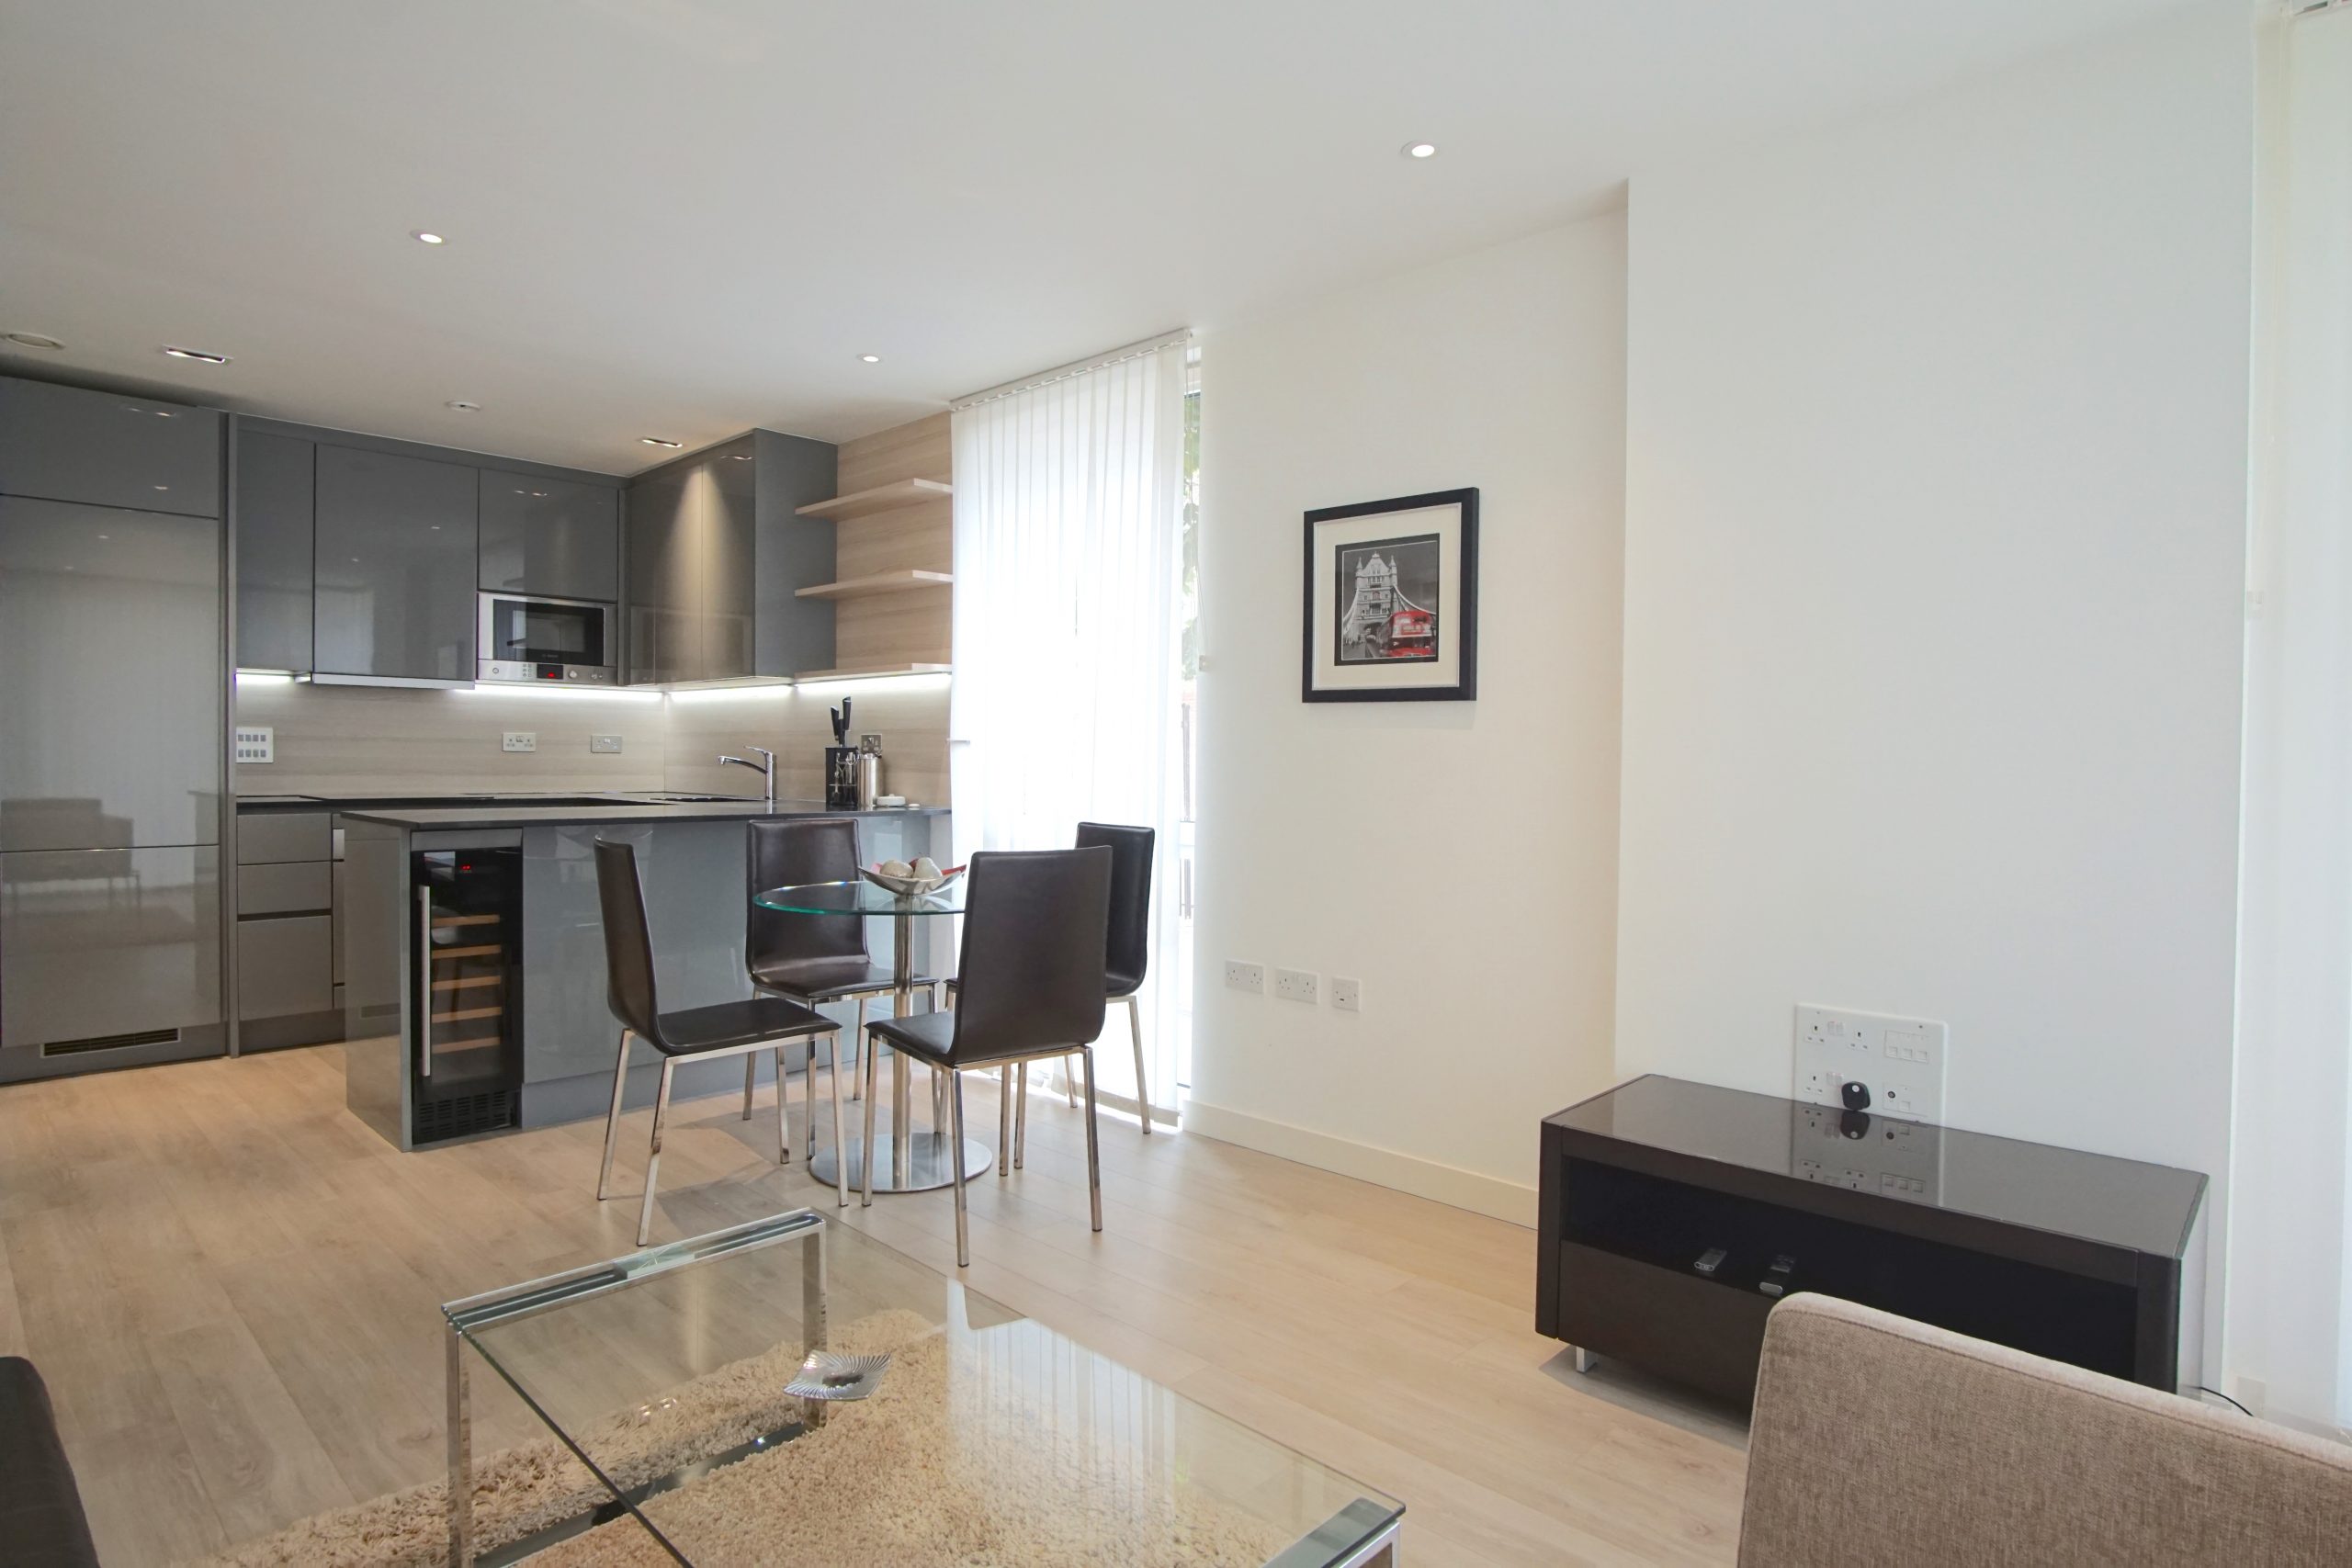 City View Apartments Woodberry Down London N4 Real Estate Sales And Lettings Services